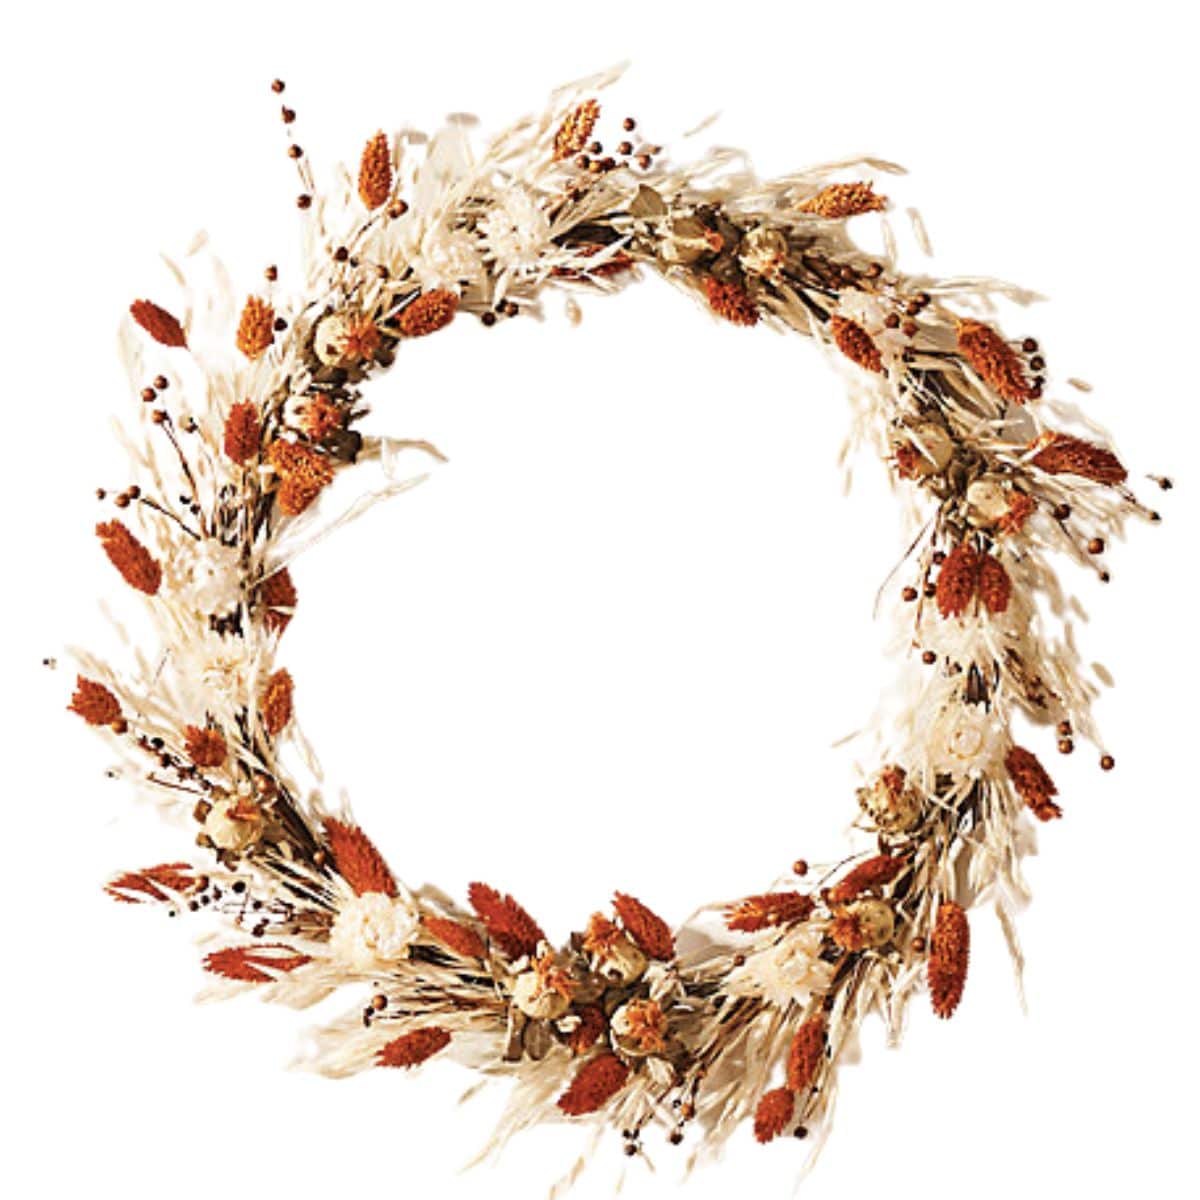 wreath made of Bleached oats, safflower blooms, and cream strawflower from terrain